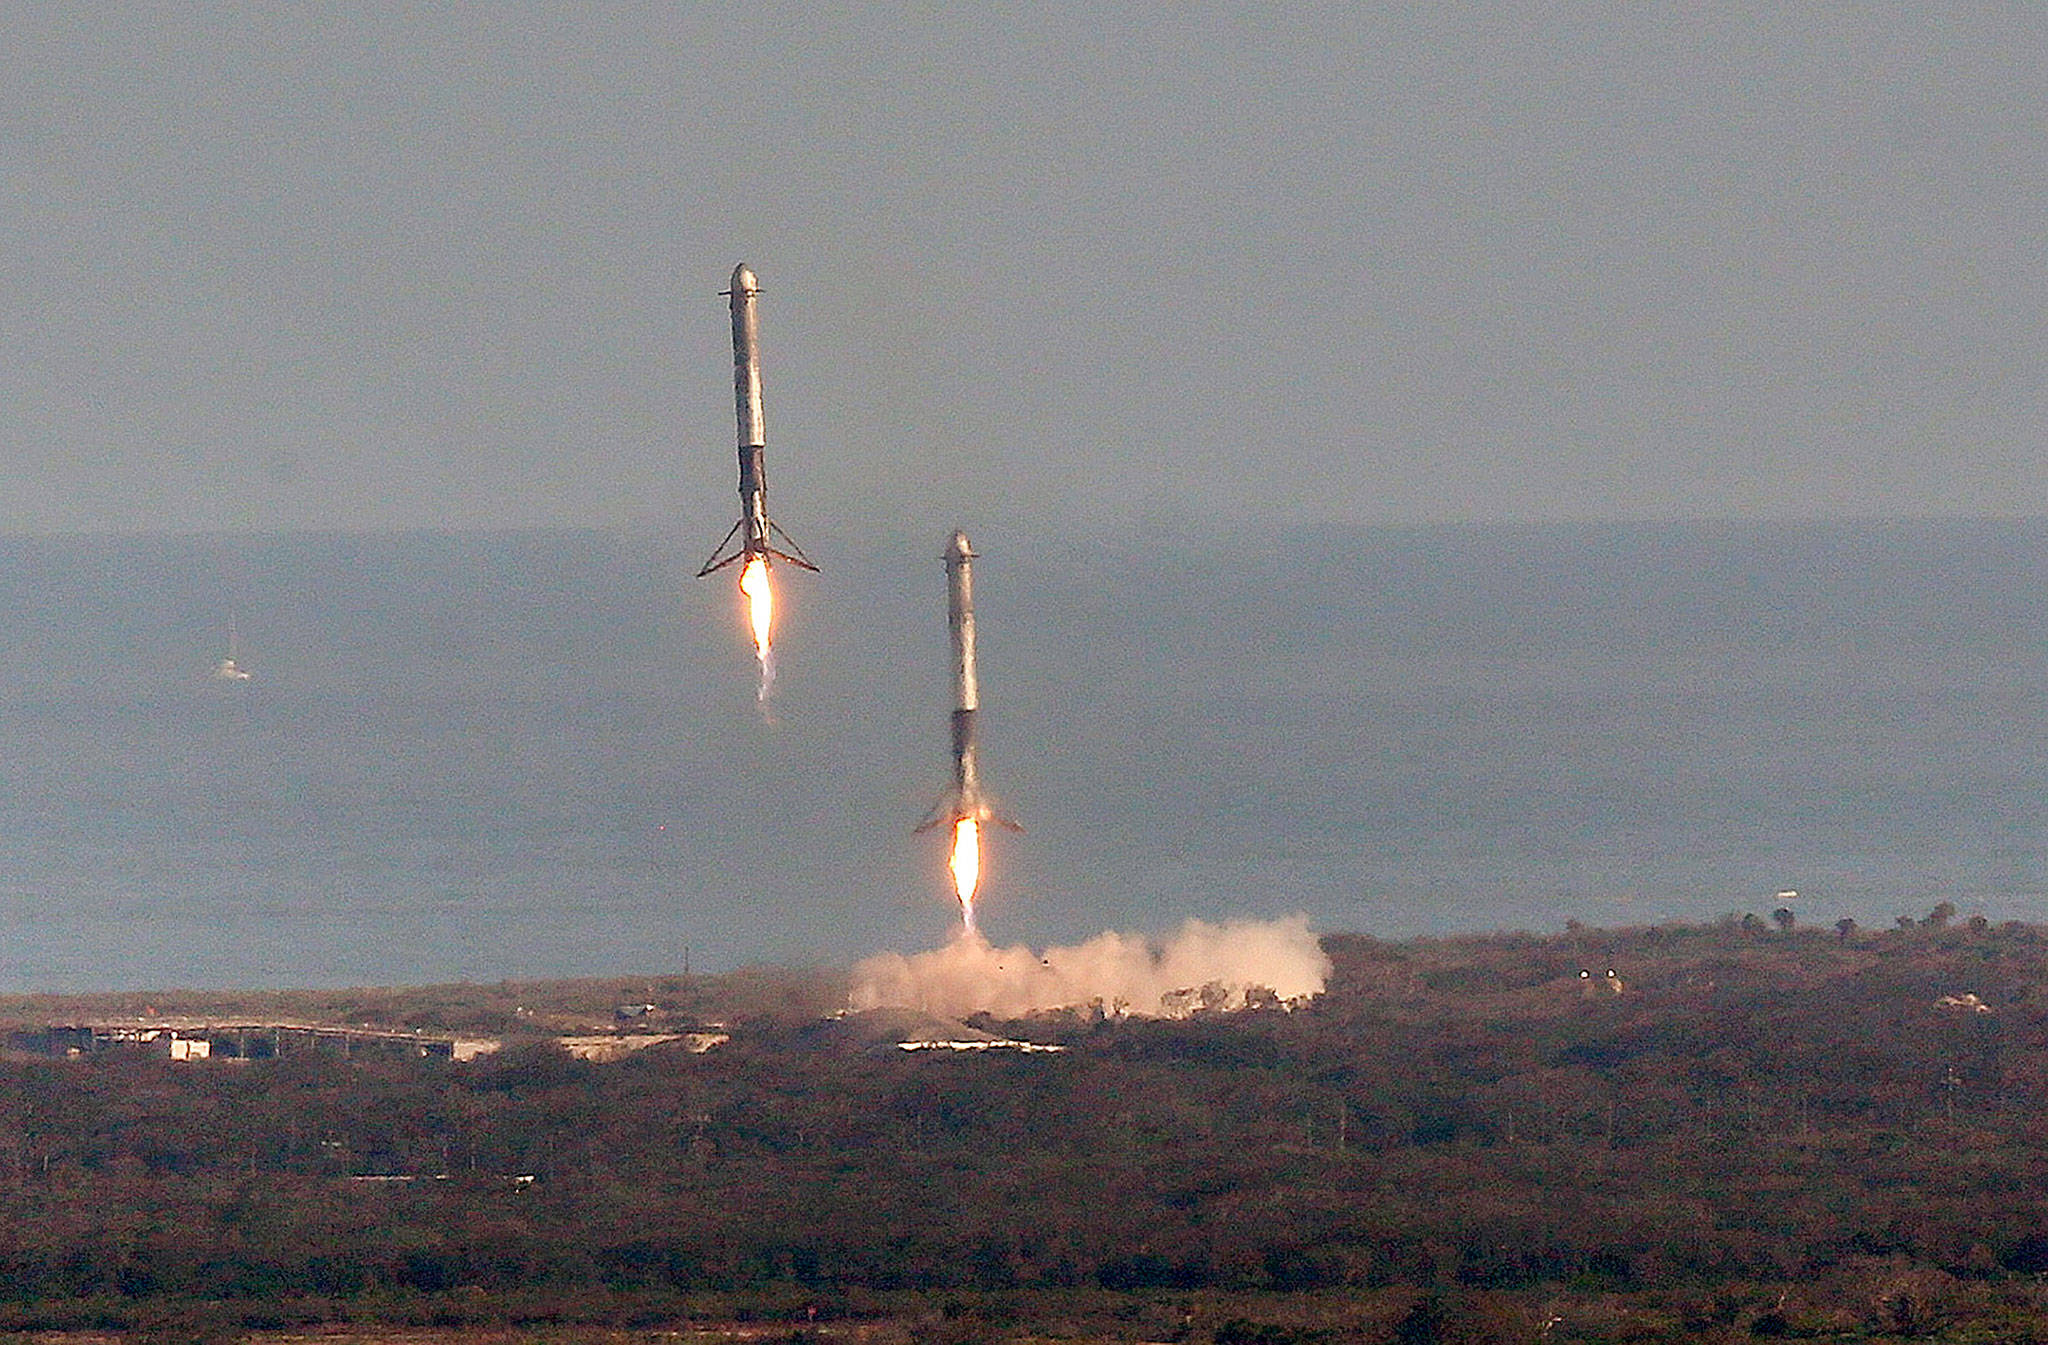 Two Falcon boosters come back to land at Cape Canaveral after SpaceX’s Falcon Heavy rocket lifted off from launch Pad 39A Tuesday for the maiden demonstration test flight at the Kennedy Space Center. The big rocket is made up of three rocket boosters that will produce more thrust than any other rocket now flying. (Red Huber/Orlando Sentinel)